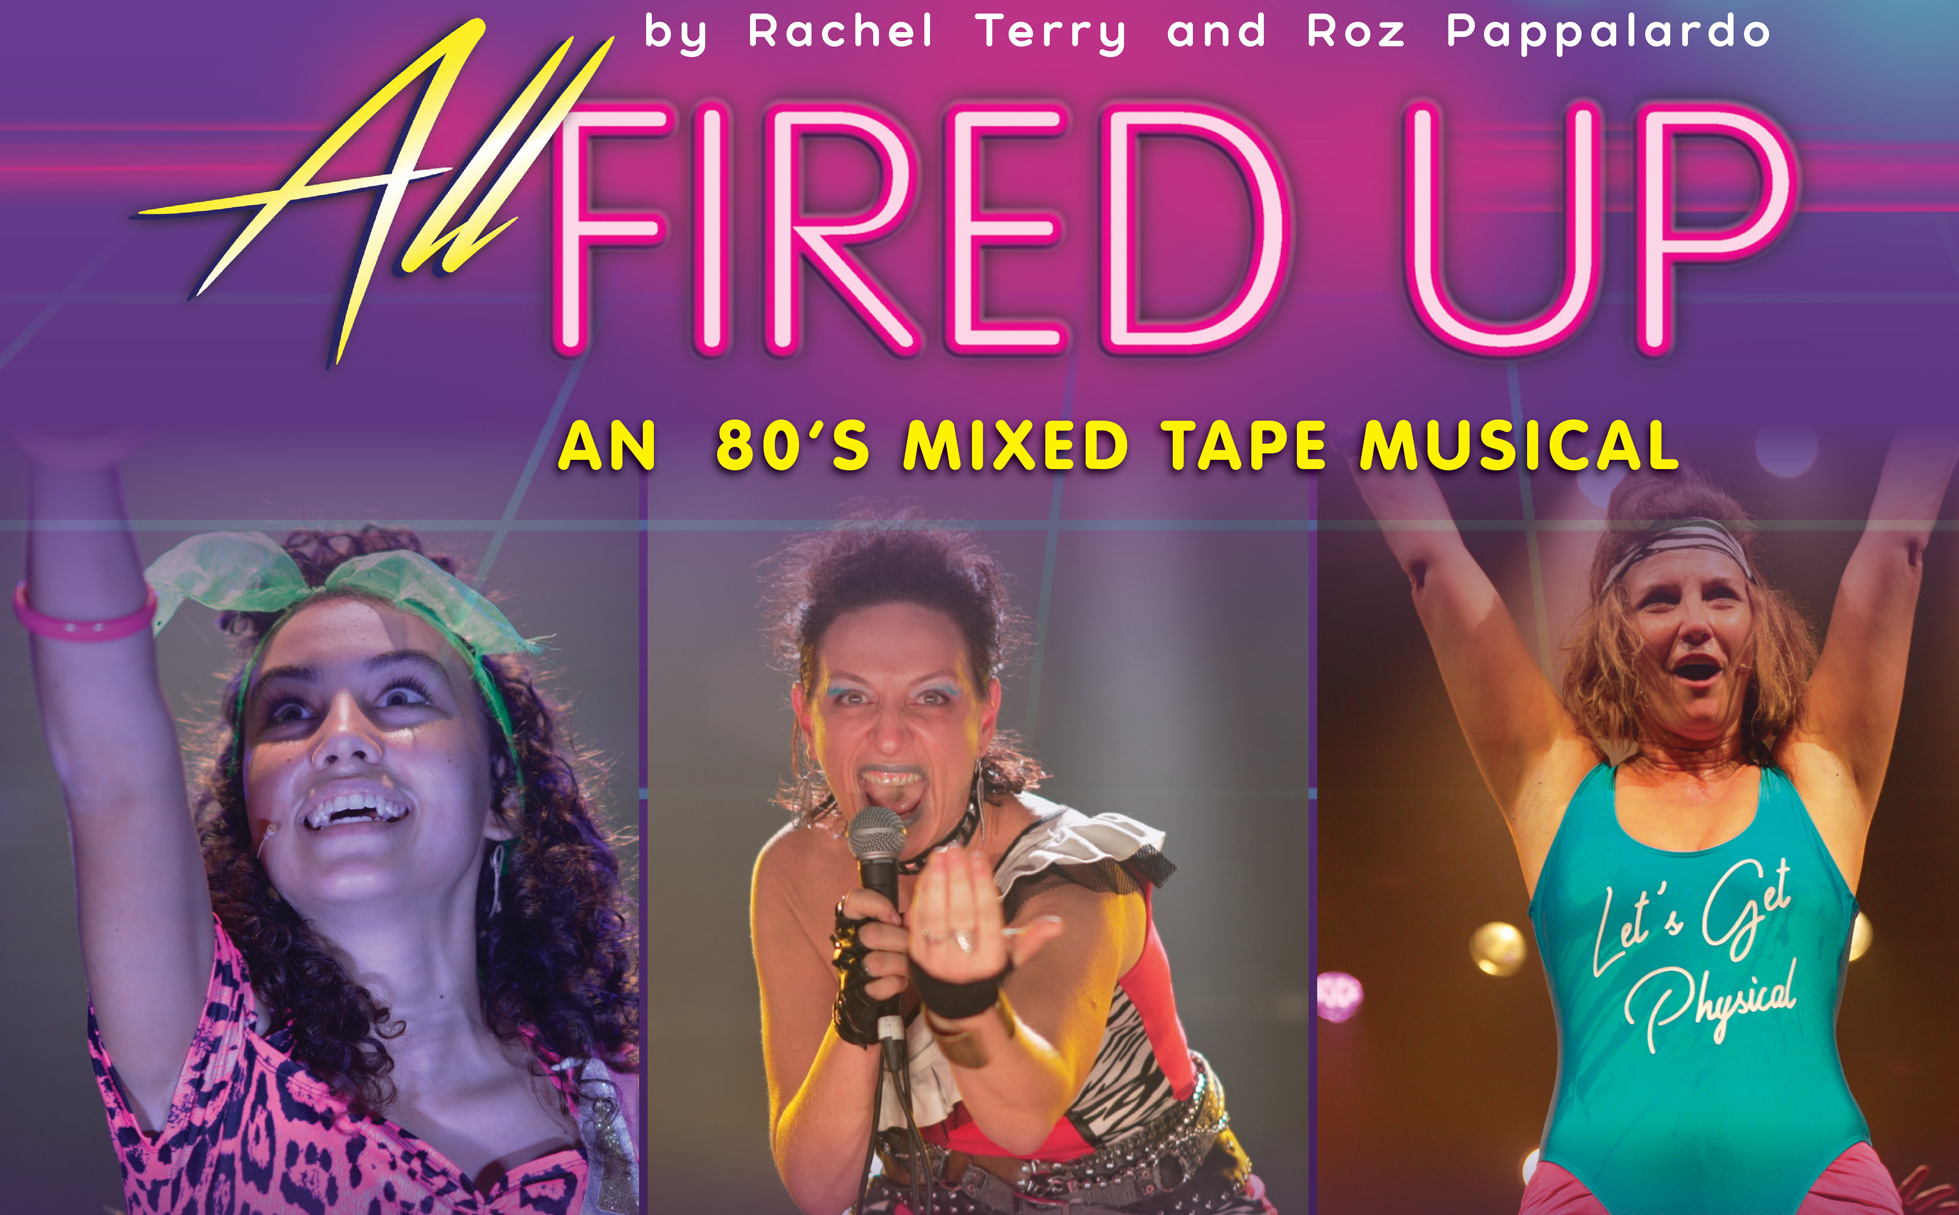 All Fired Up - An 80's Mixed Tape Musical by Rachel Terry and Roz Pappalardo